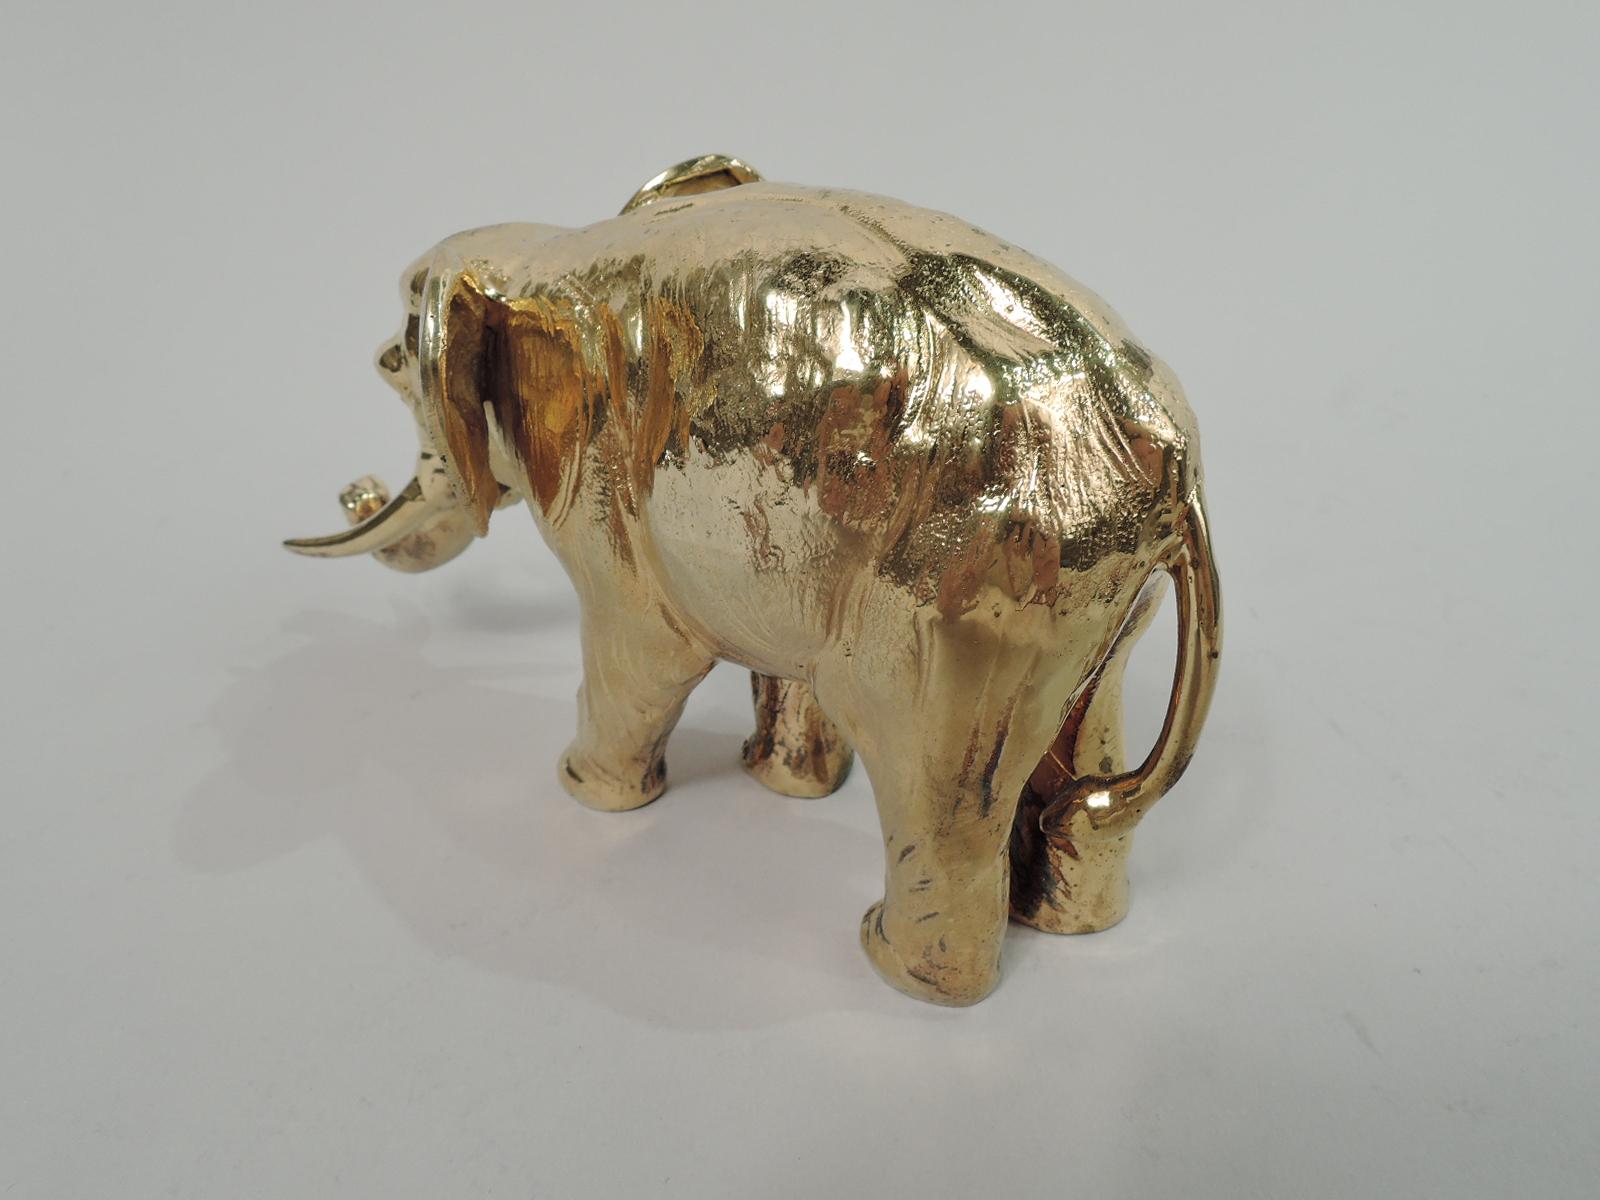 Turn-of-the-century German gilt 800 silver elephant figure. A majestic beast with big funny ears, upturned trunk, and long sharp tusks rumbling along on massive legs. Nuanced depiction of wrinkles and sags. Marked. Weight: 7.5 troy ounces.